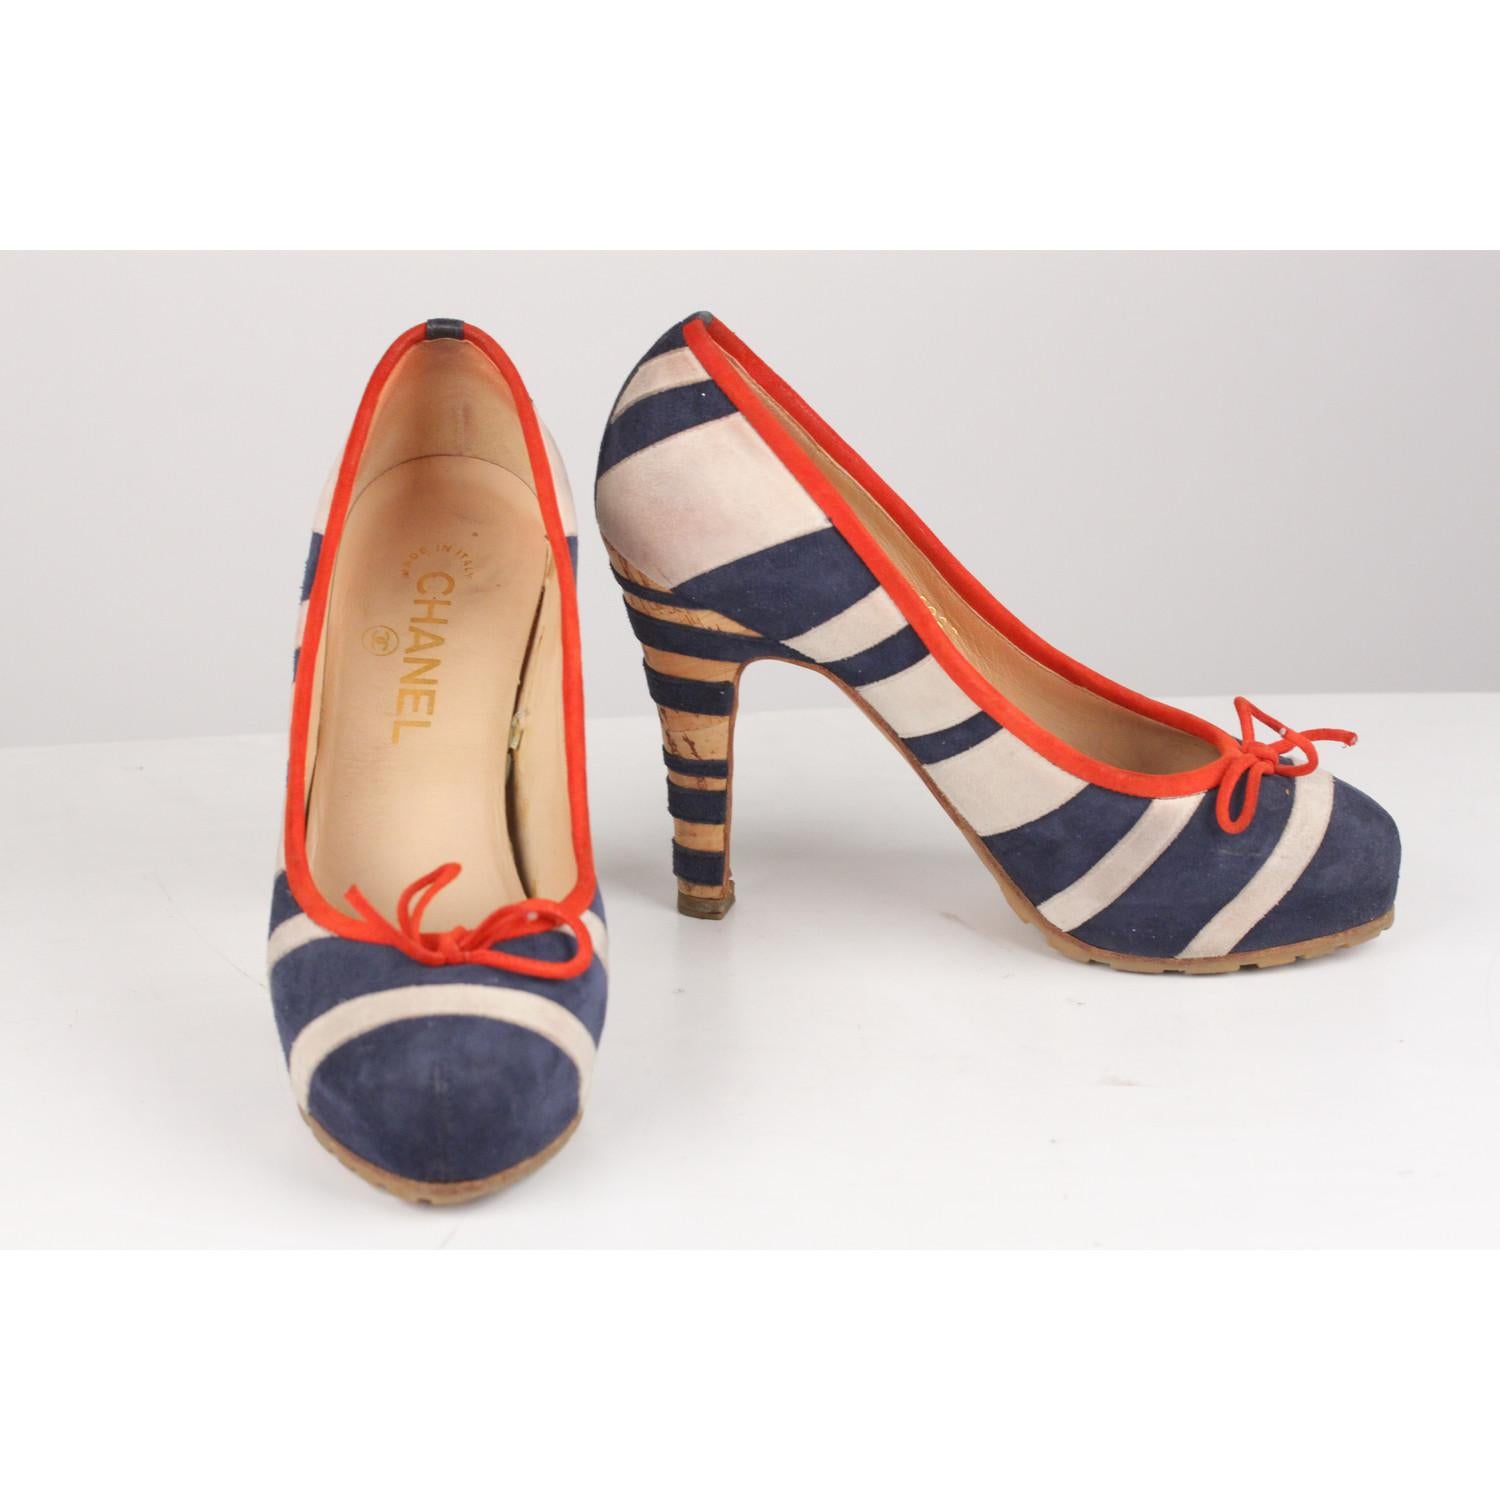 Brown Chanel Red Navy White Suede Striped Pumps Heels Size 36.5